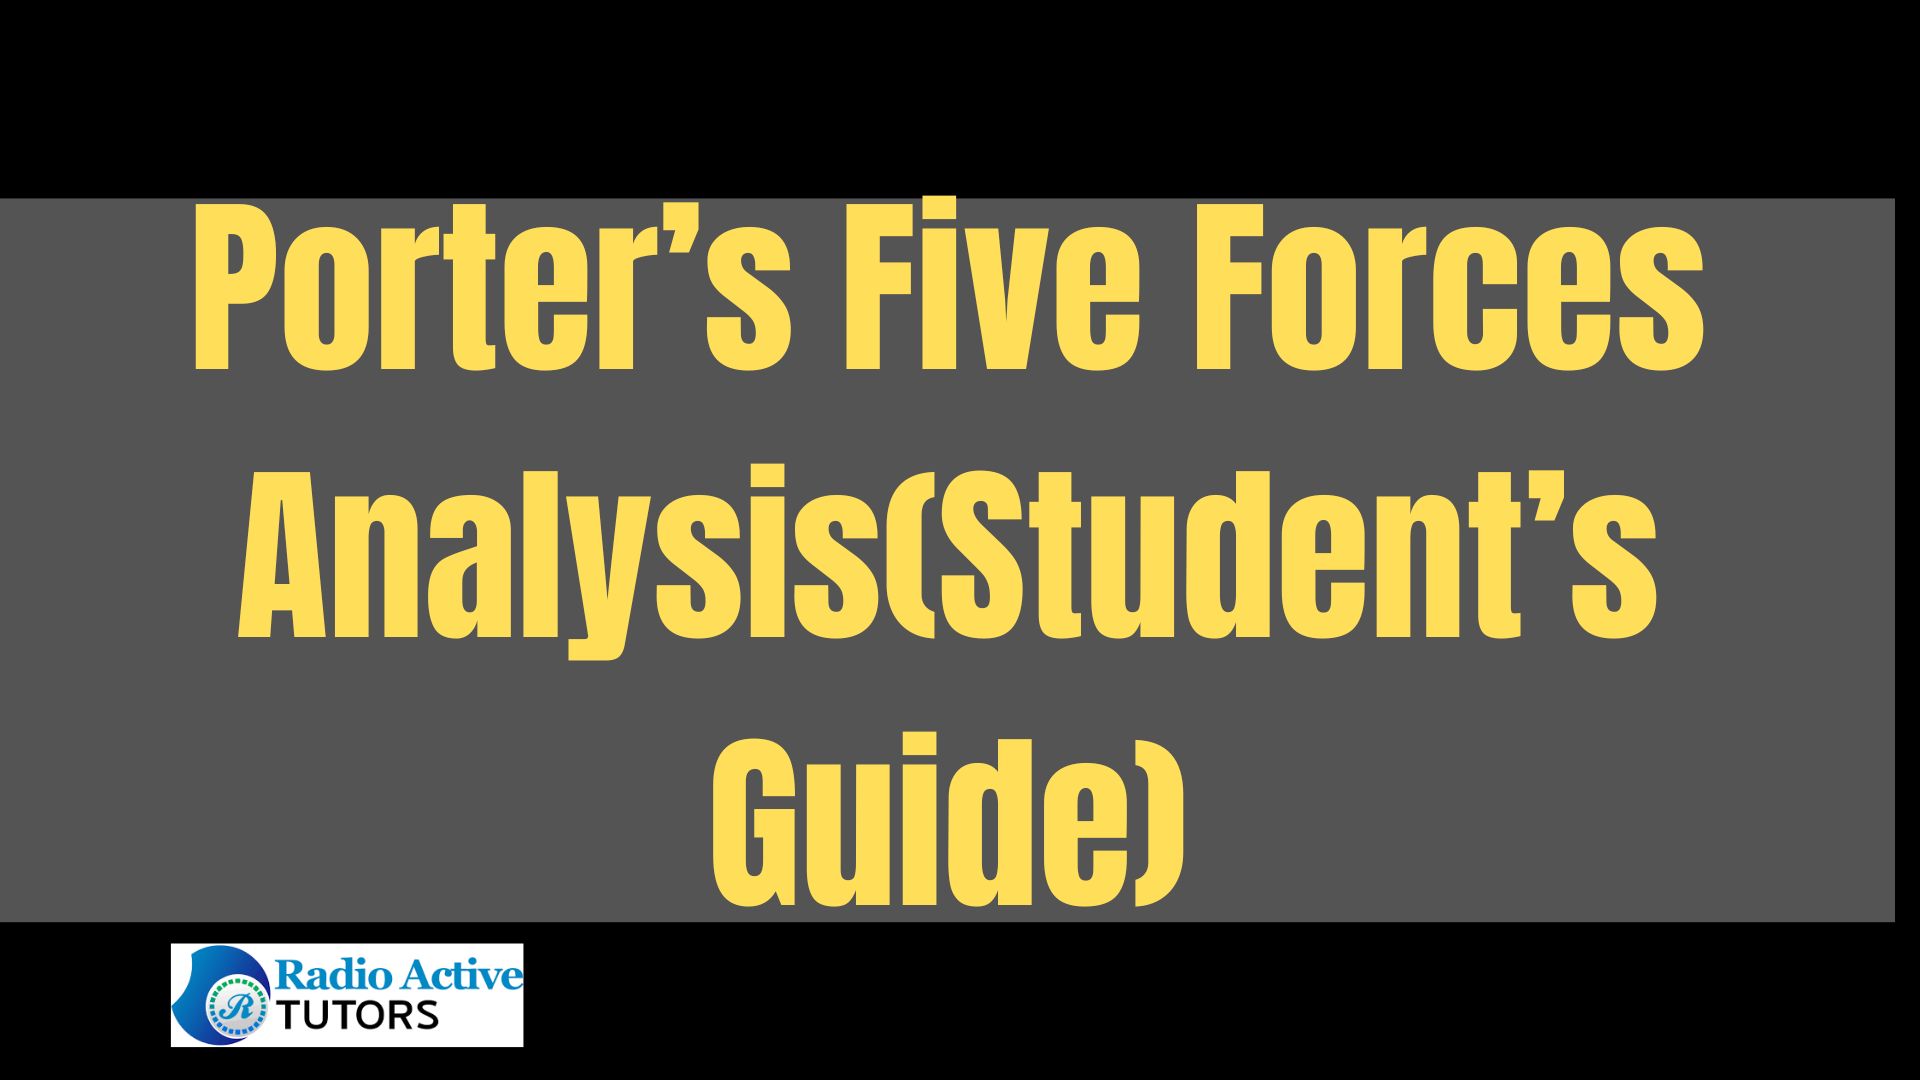 Porter’s Five Forces Analysis(Student’s Guide)